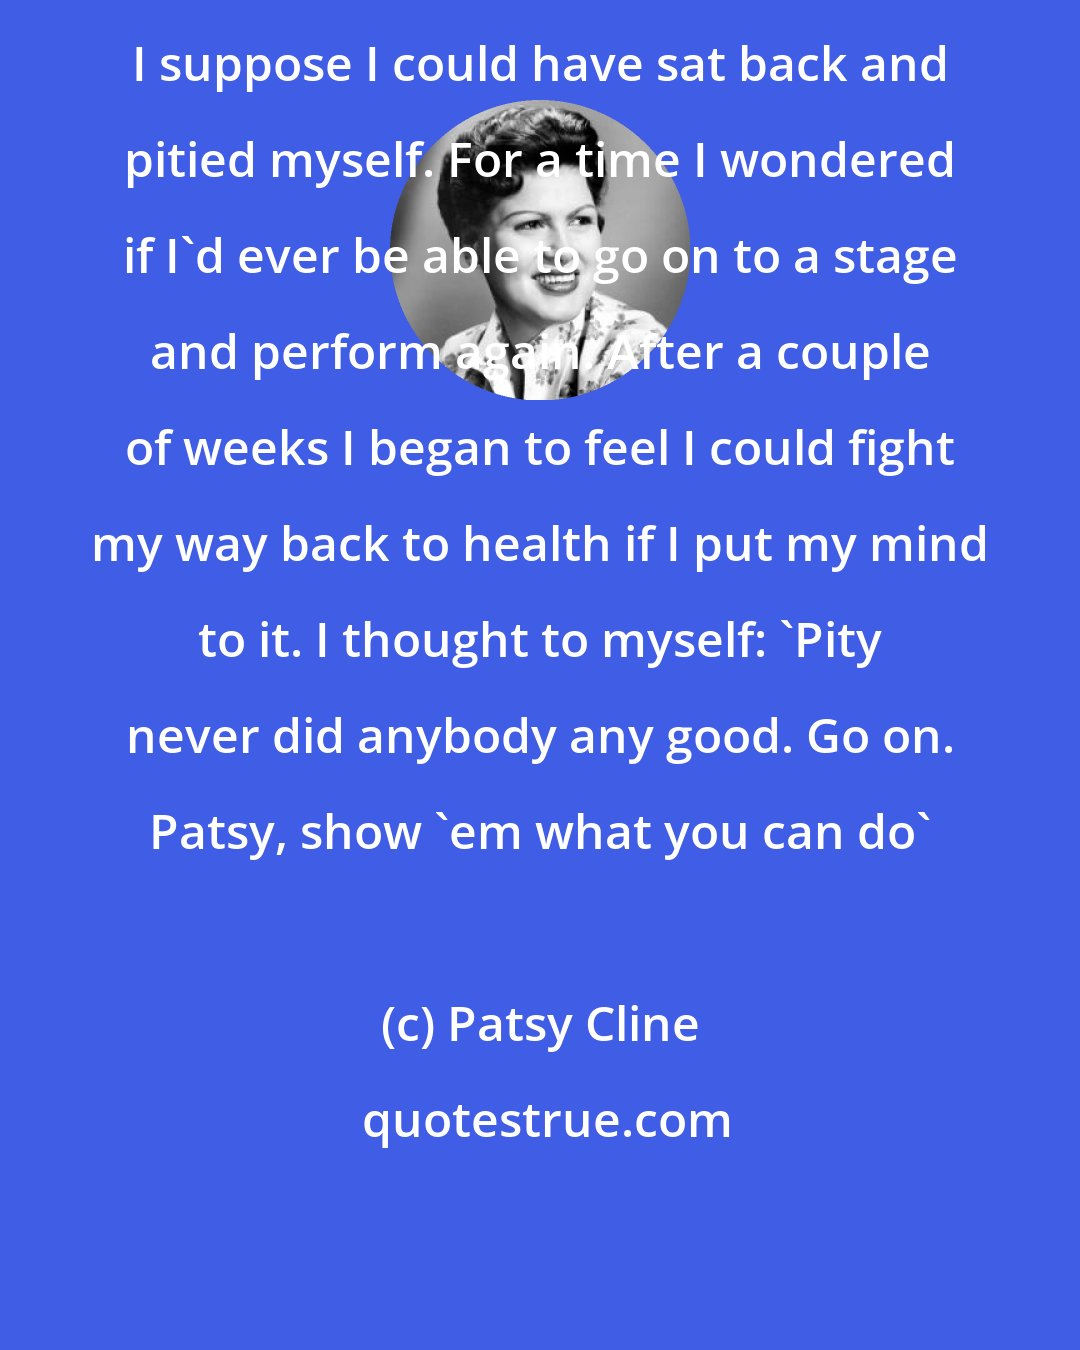 Patsy Cline: I suppose I could have sat back and pitied myself. For a time I wondered if I'd ever be able to go on to a stage and perform again. After a couple of weeks I began to feel I could fight my way back to health if I put my mind to it. I thought to myself: 'Pity never did anybody any good. Go on. Patsy, show 'em what you can do'